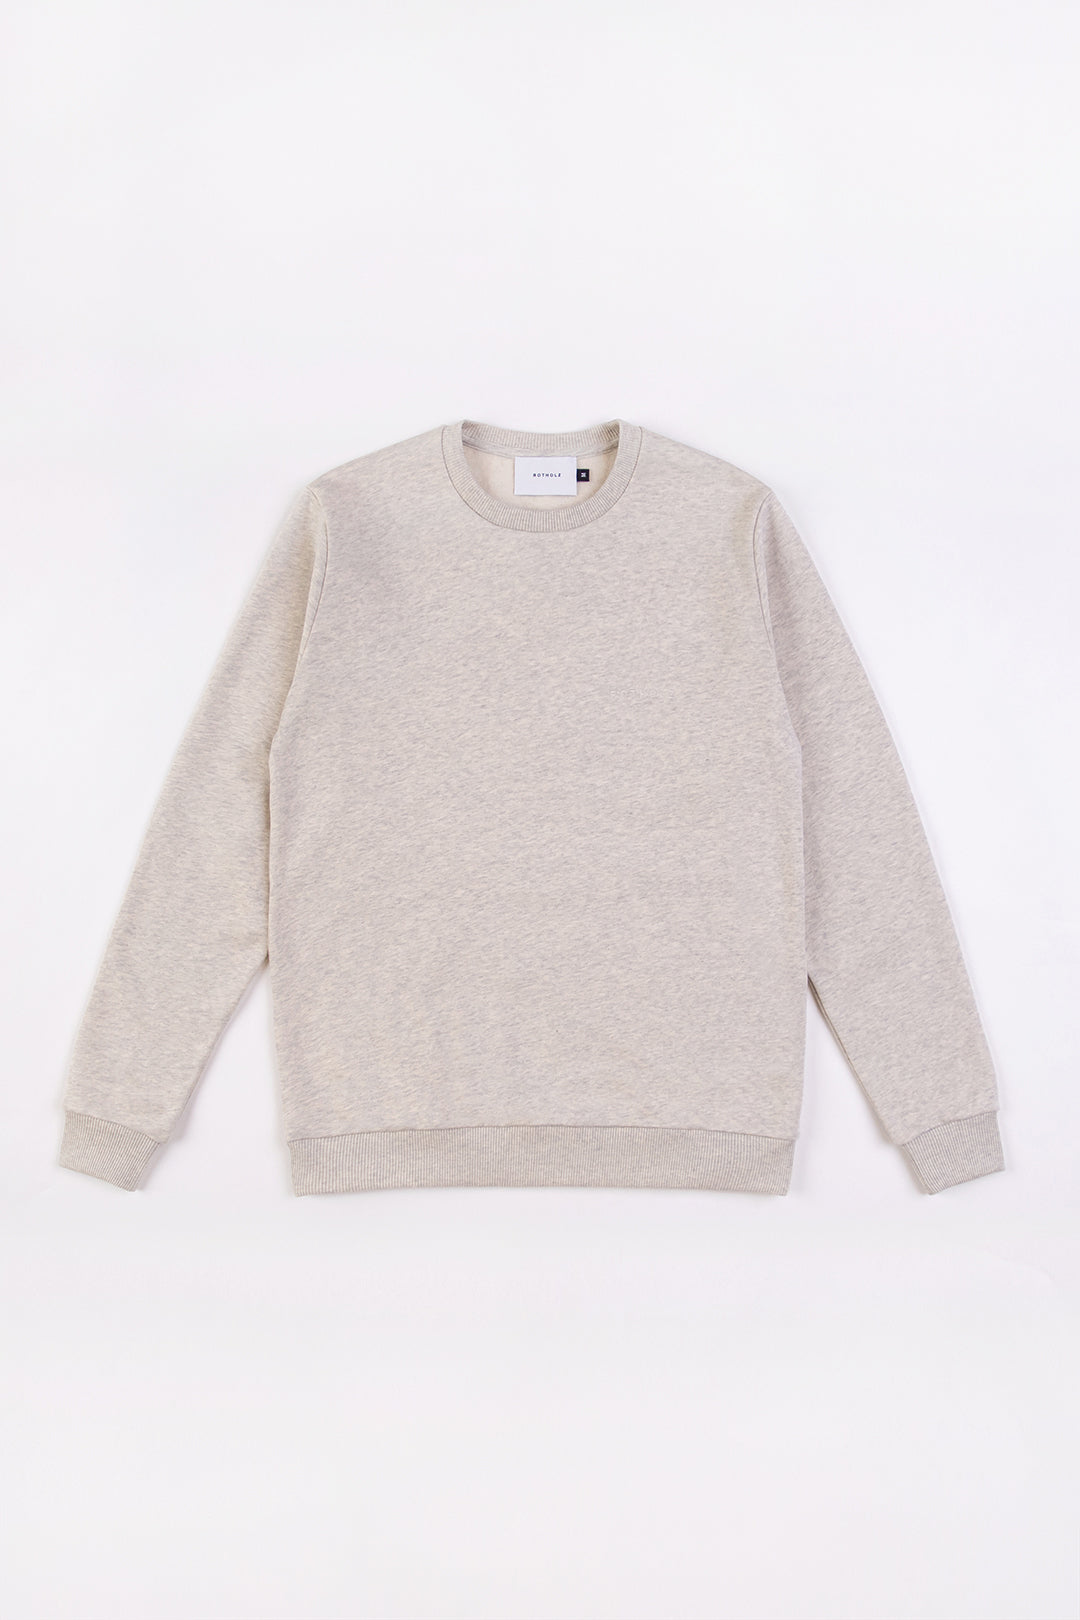 Light gray sweater logo made of organic cotton from Rotholz